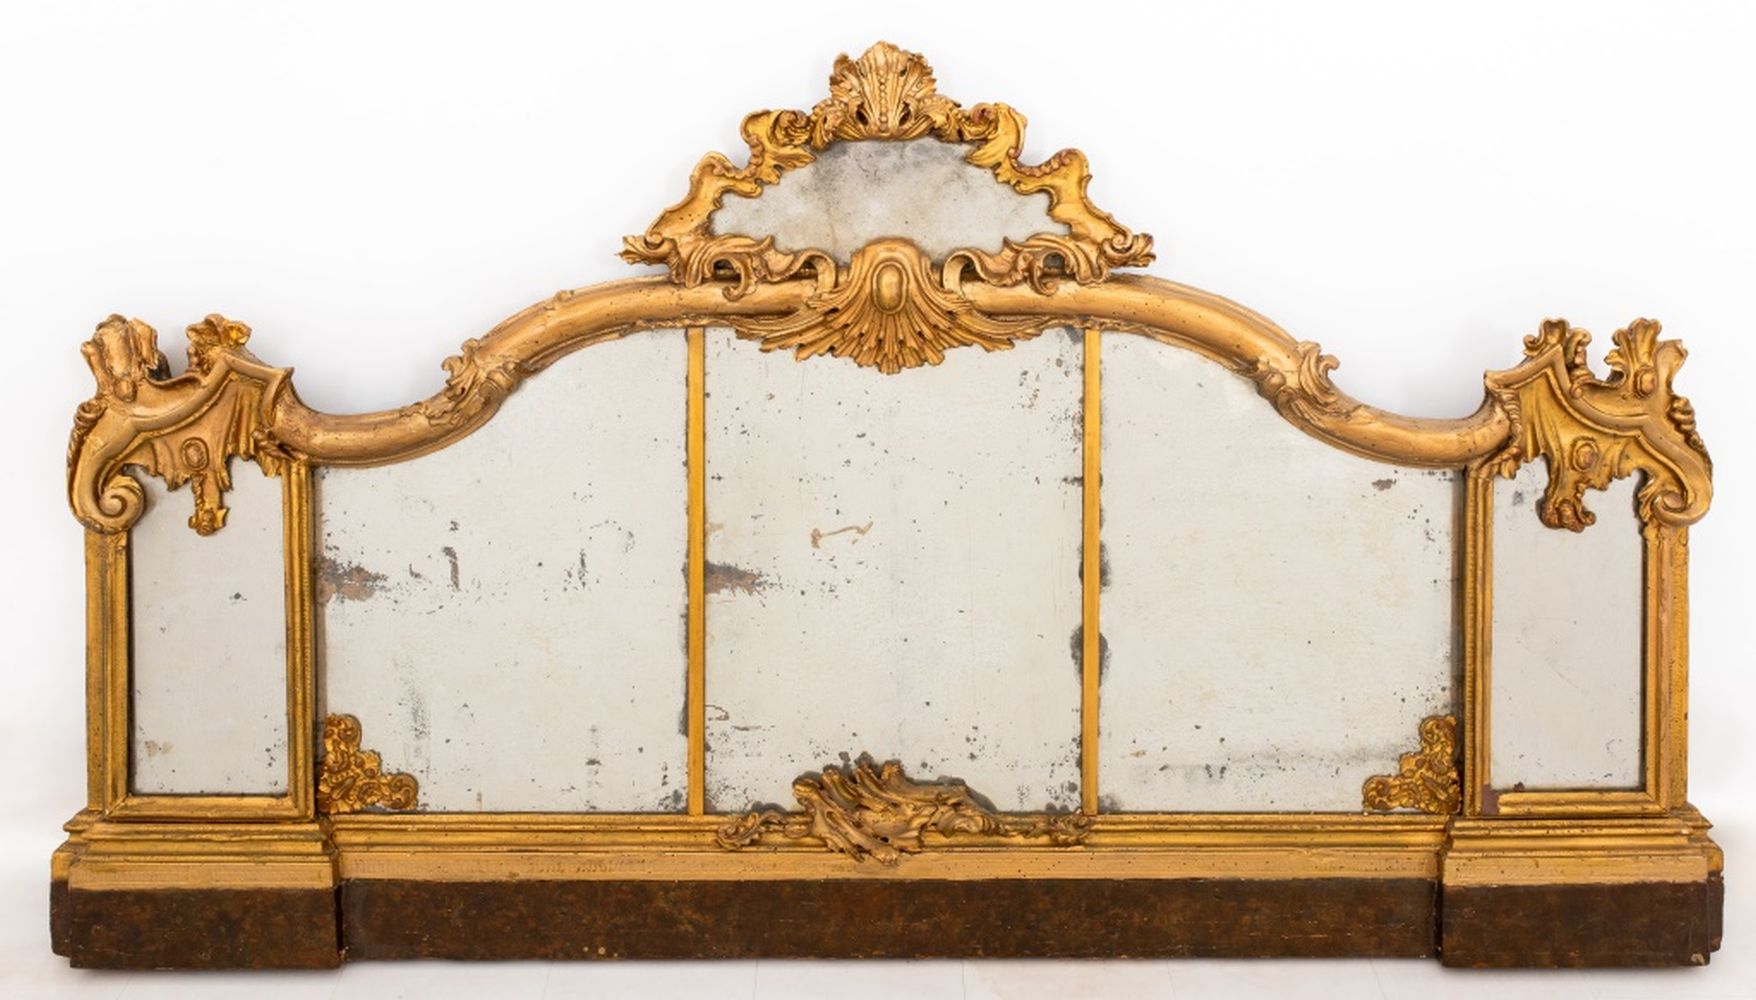 LOUIS XVI STYLE GILTWOOD MANTLE 3ced58